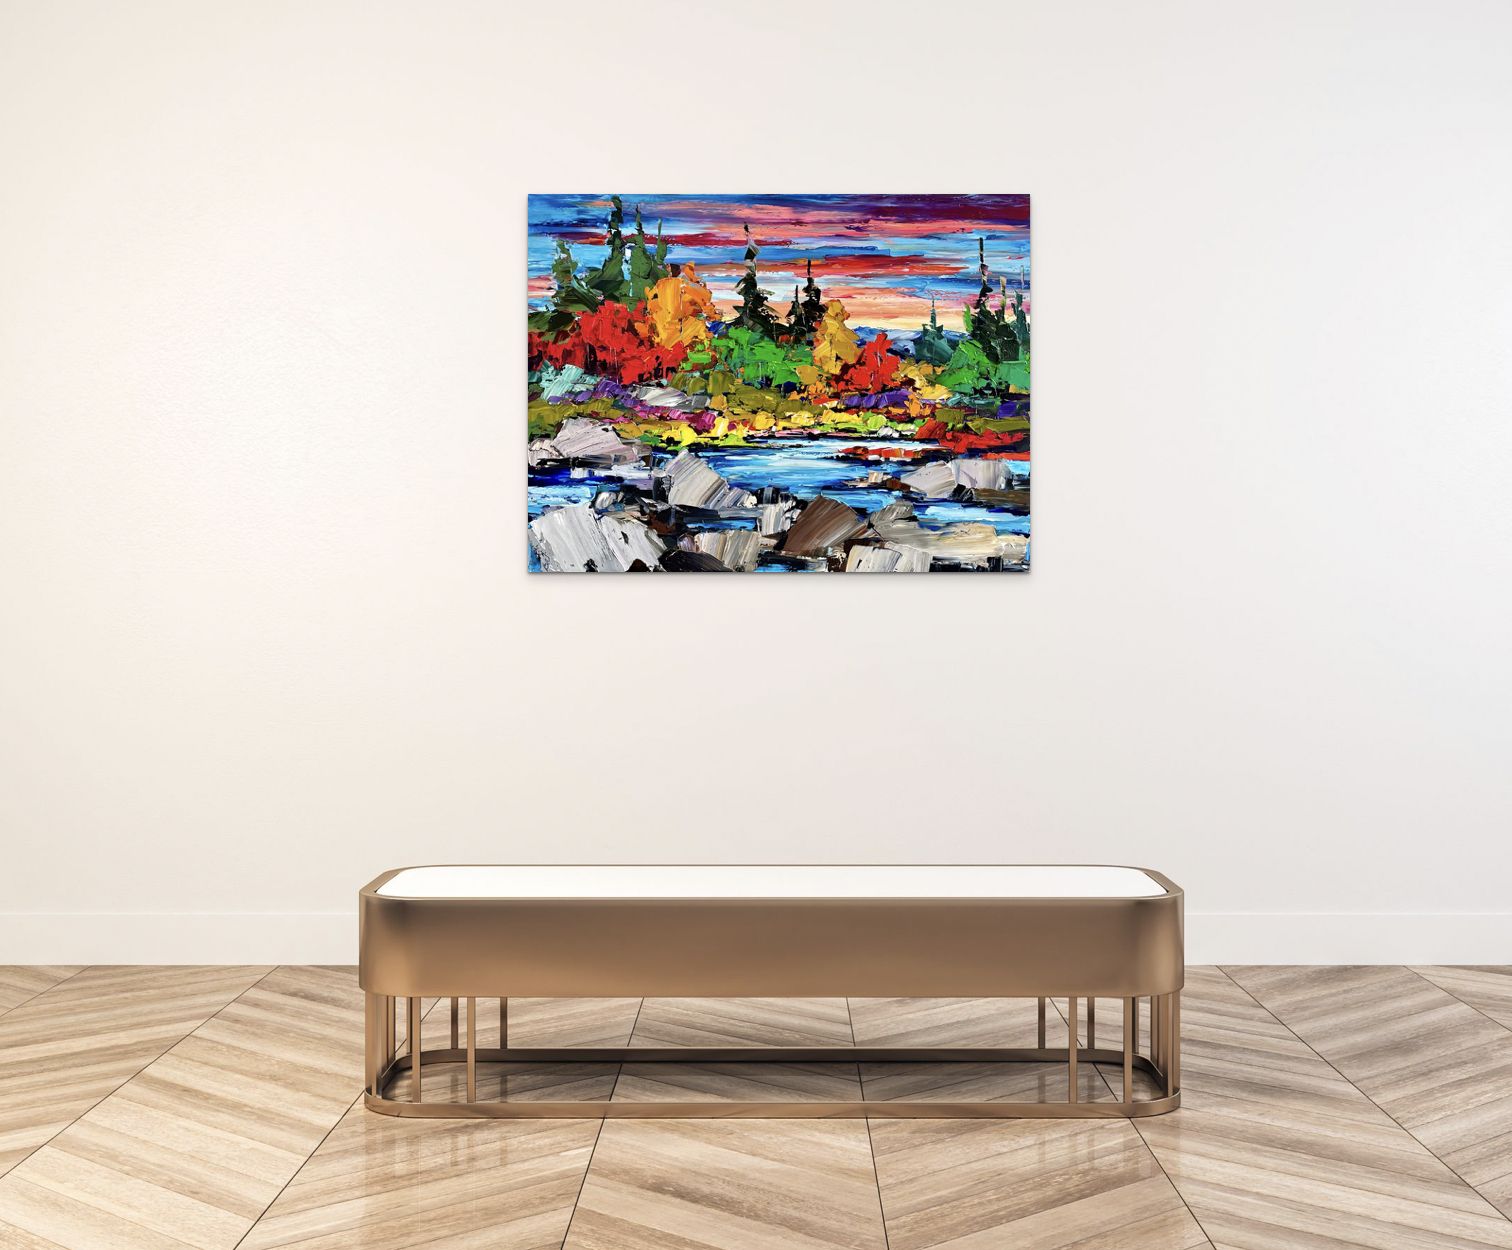 In a Section of Time Everything is Fine, oil landscape painting by Kimberly Kiel | Effusion Art Gallery + Cast Glass Studio, Invermere BC